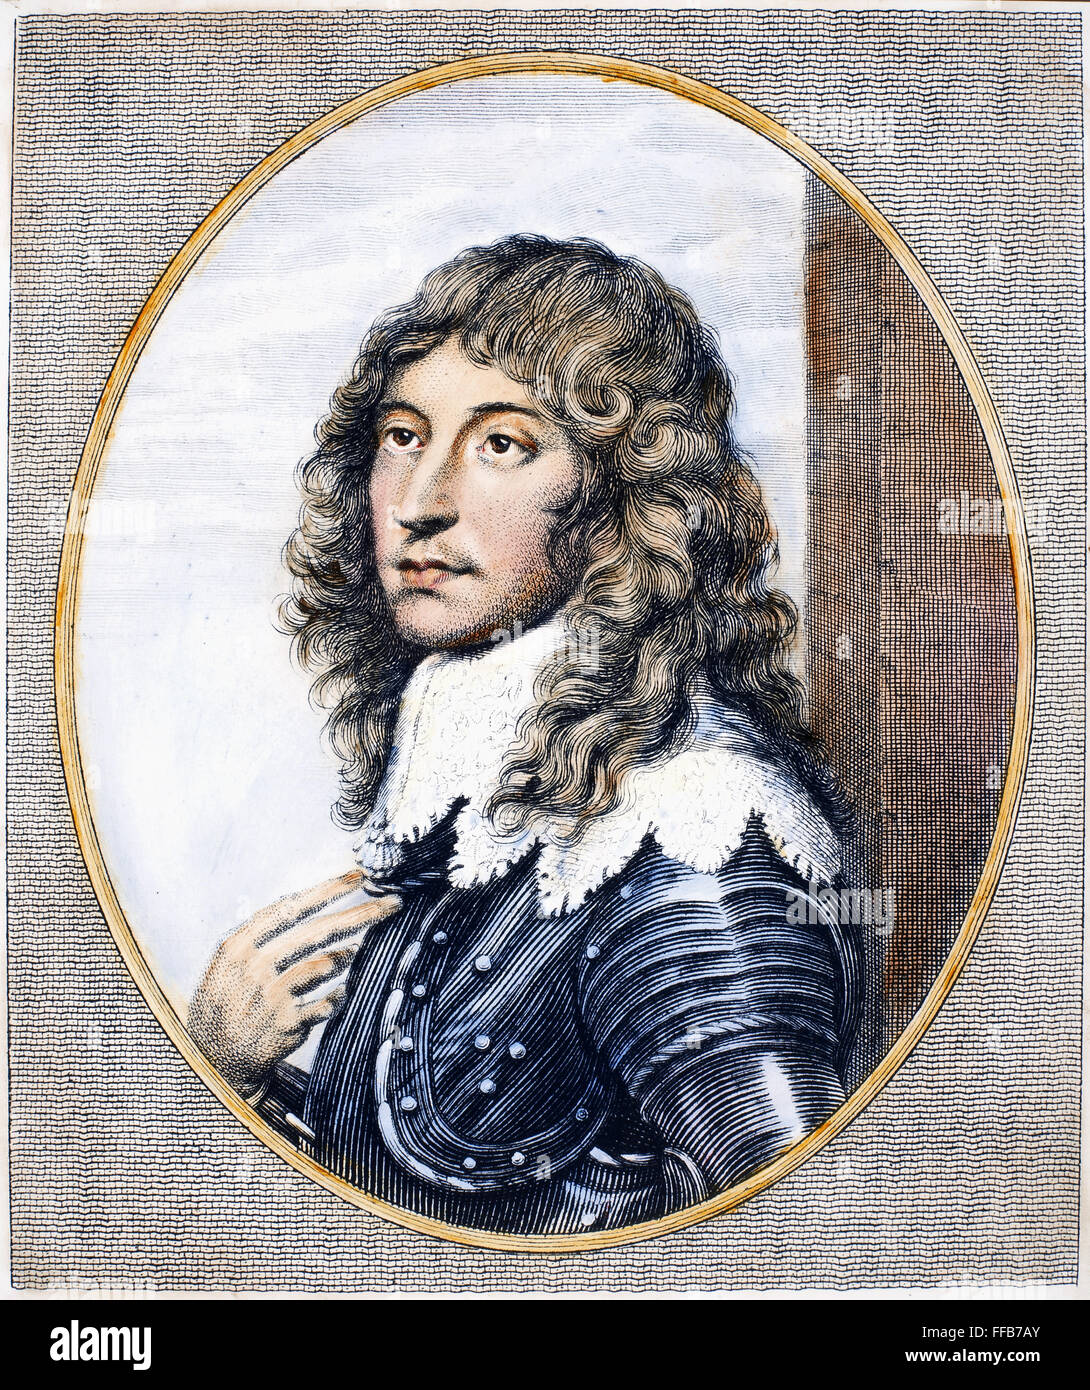 PRINCE RUPERT (1619-1682). /nCount Palatine of Rhine, Duke of Bavaria and Duke of Cumberland. Line engraving, 1828, after a painting by Sir Anthony Van Dyck. Stock Photo